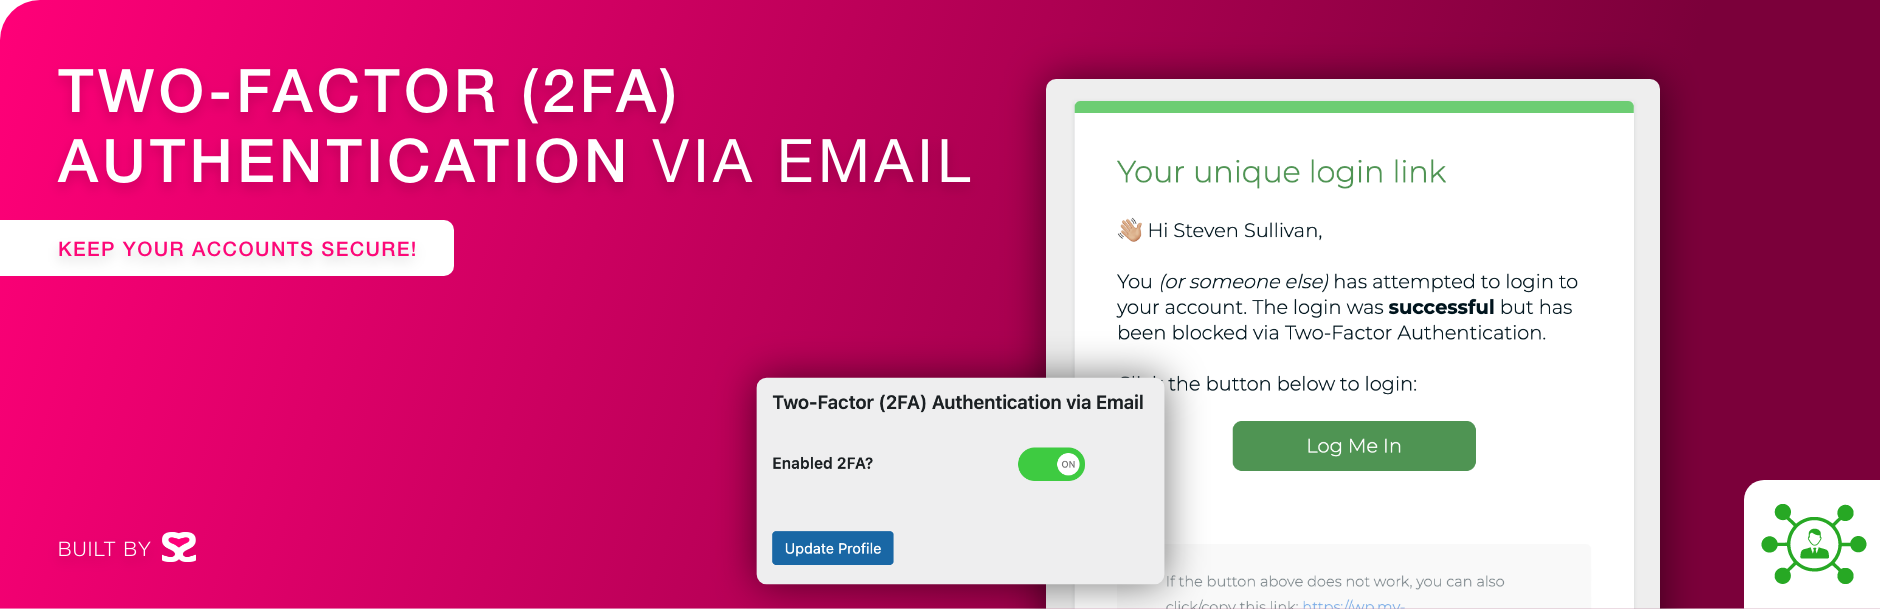 Two Factor (2FA) Authentication via Email